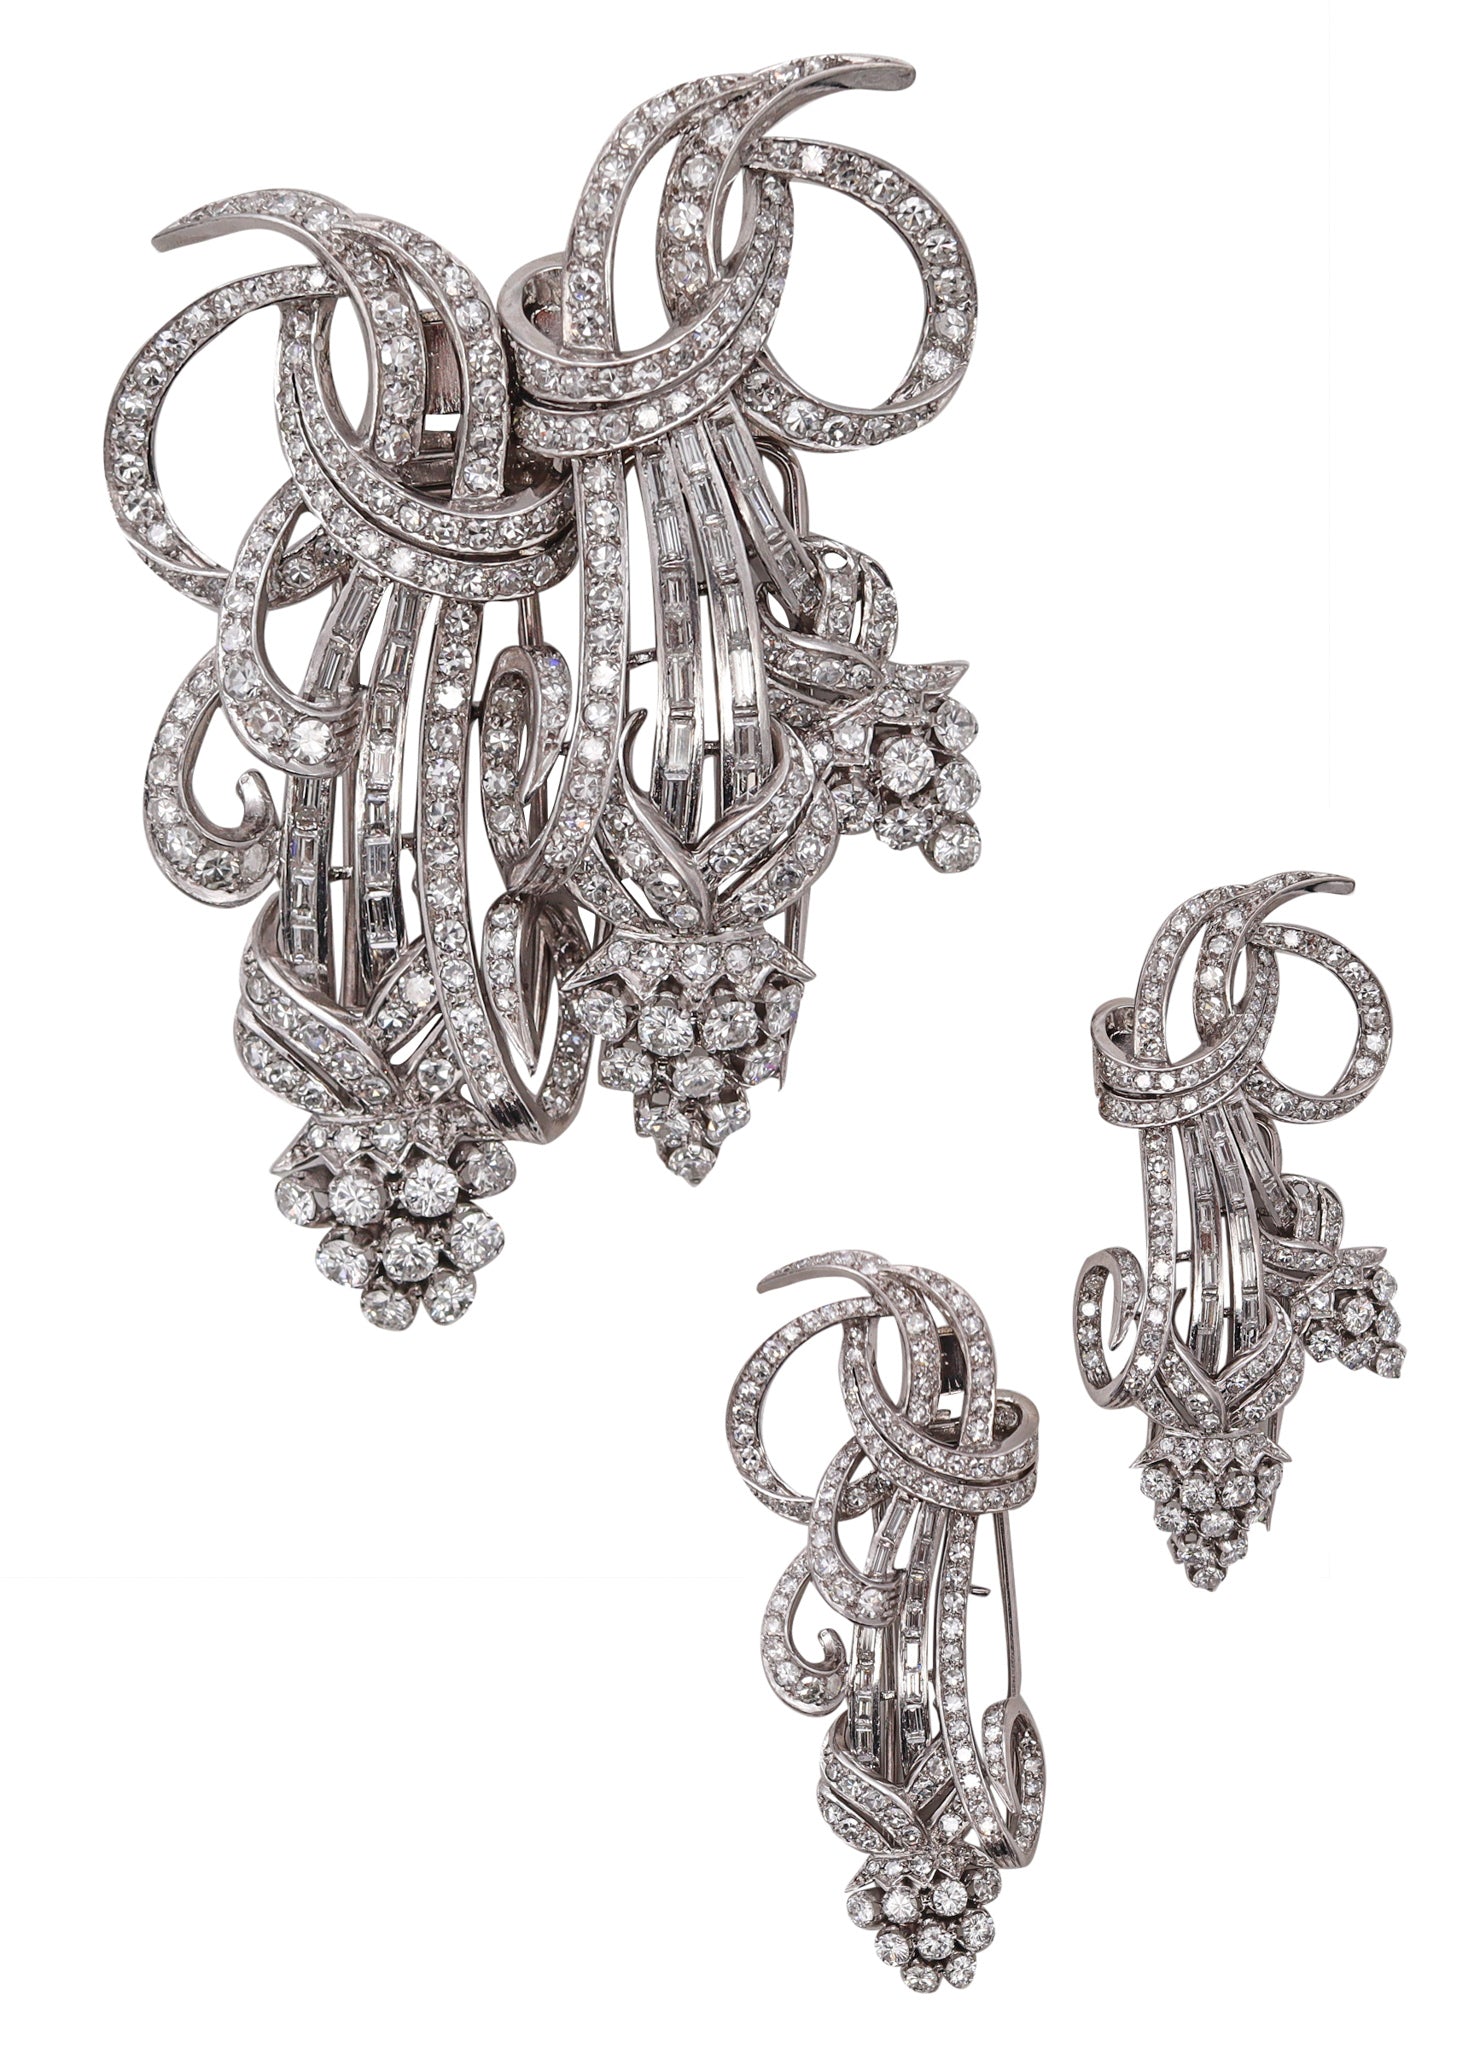 *Art deco 1930 Platinum Convertible Clips-Brooch with 12.17 Cts in mixed cuts Diamonds